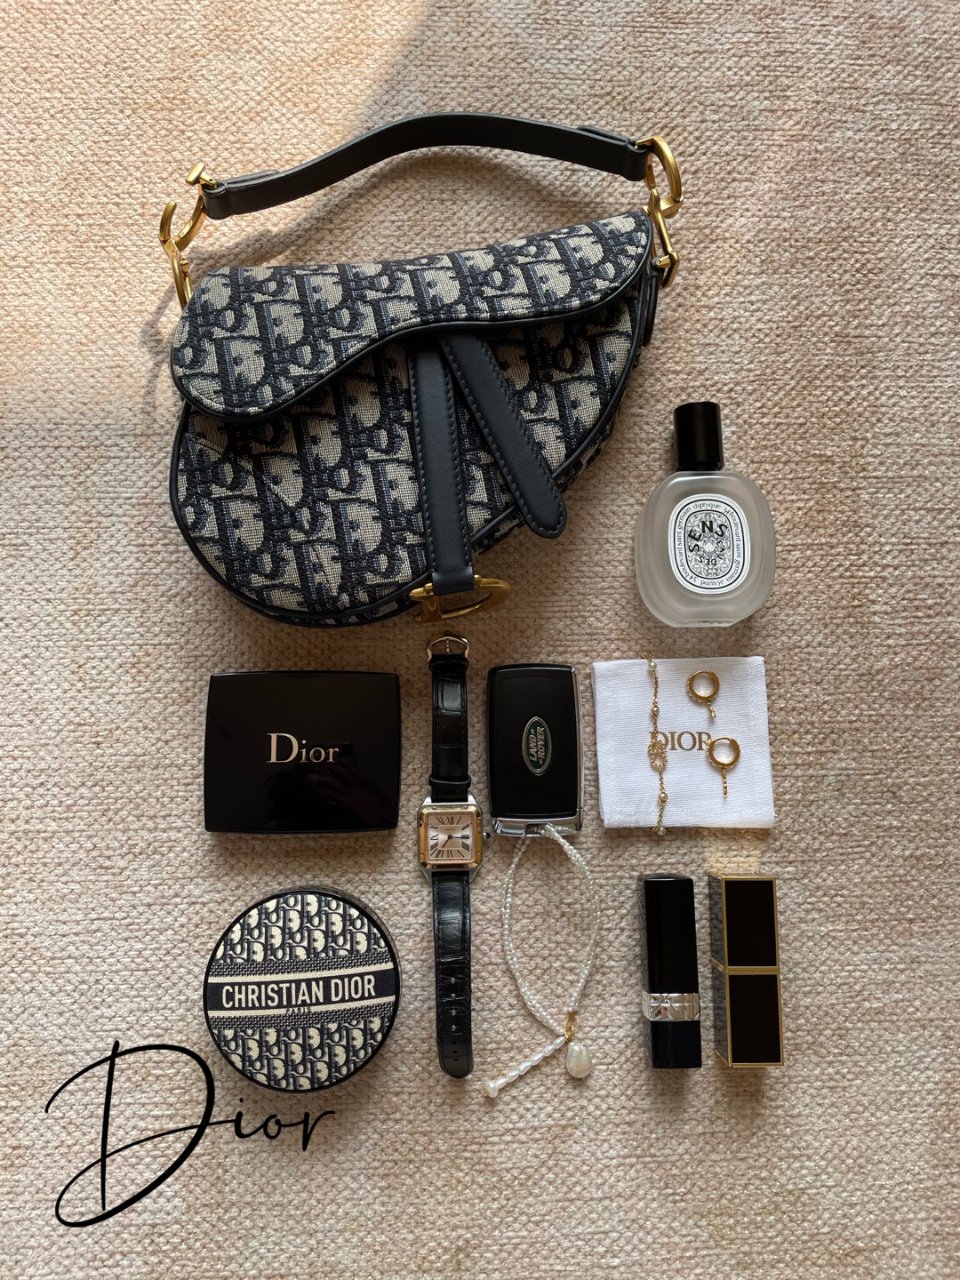 what is in my bag？